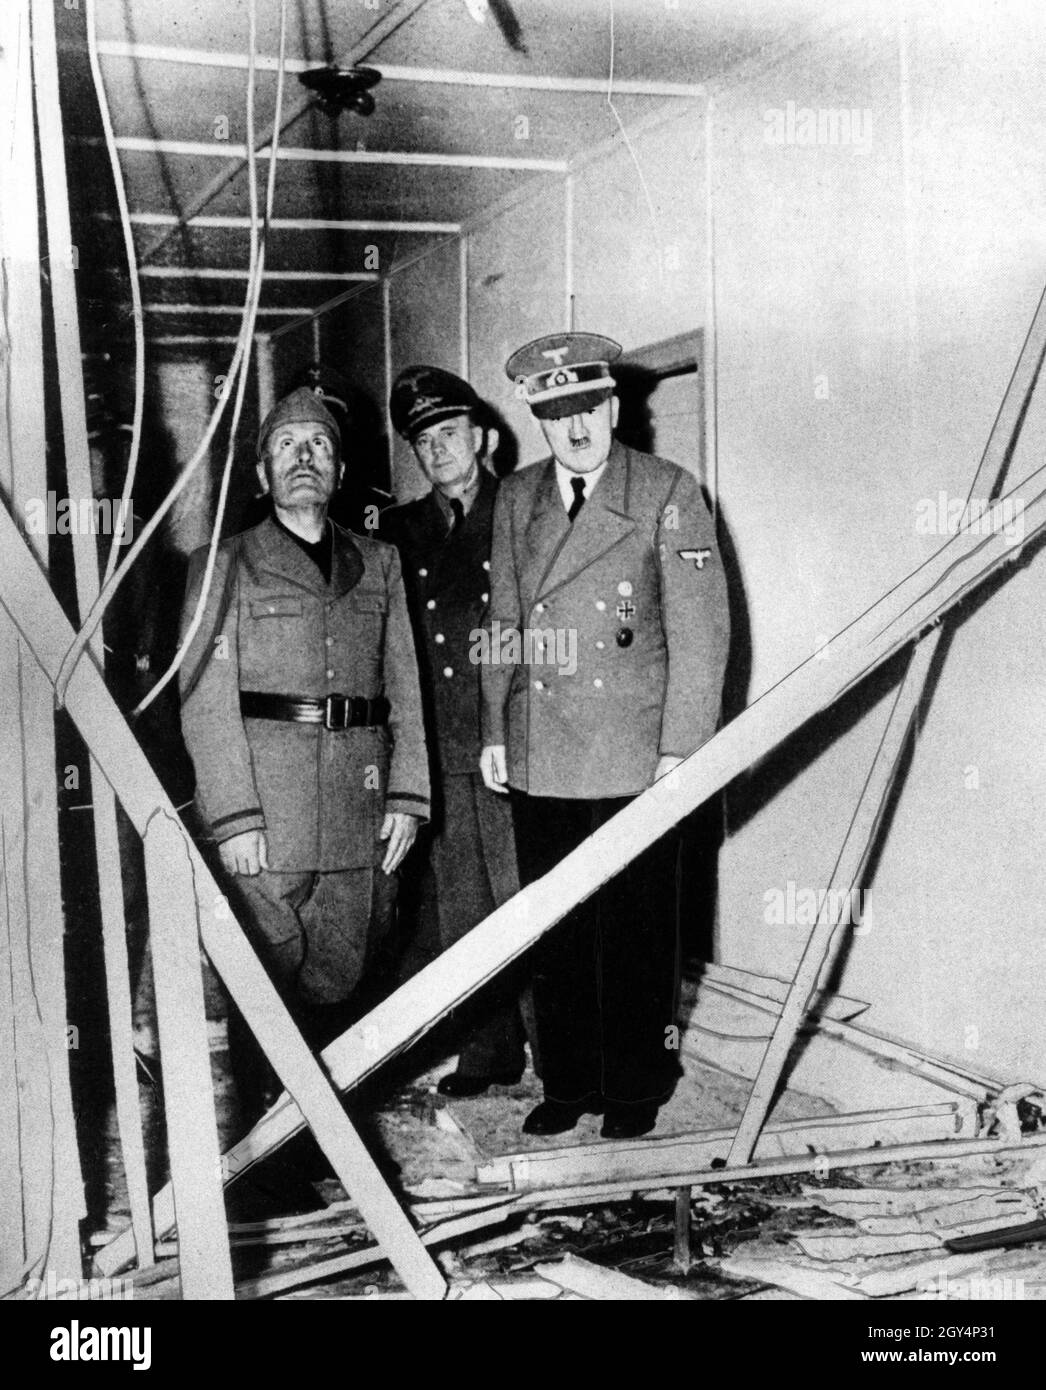 Mussolini had arrived at the Führer's headquarters on 20 April and arrived at the Wolf's Lair a few hours after the attack by the military resistance around Claus Graf Schenk von Stauffenberg. The visibly excited Hitler then showed the Duce the damage caused by the detonation of the bomb. [automated translation] Stock Photo